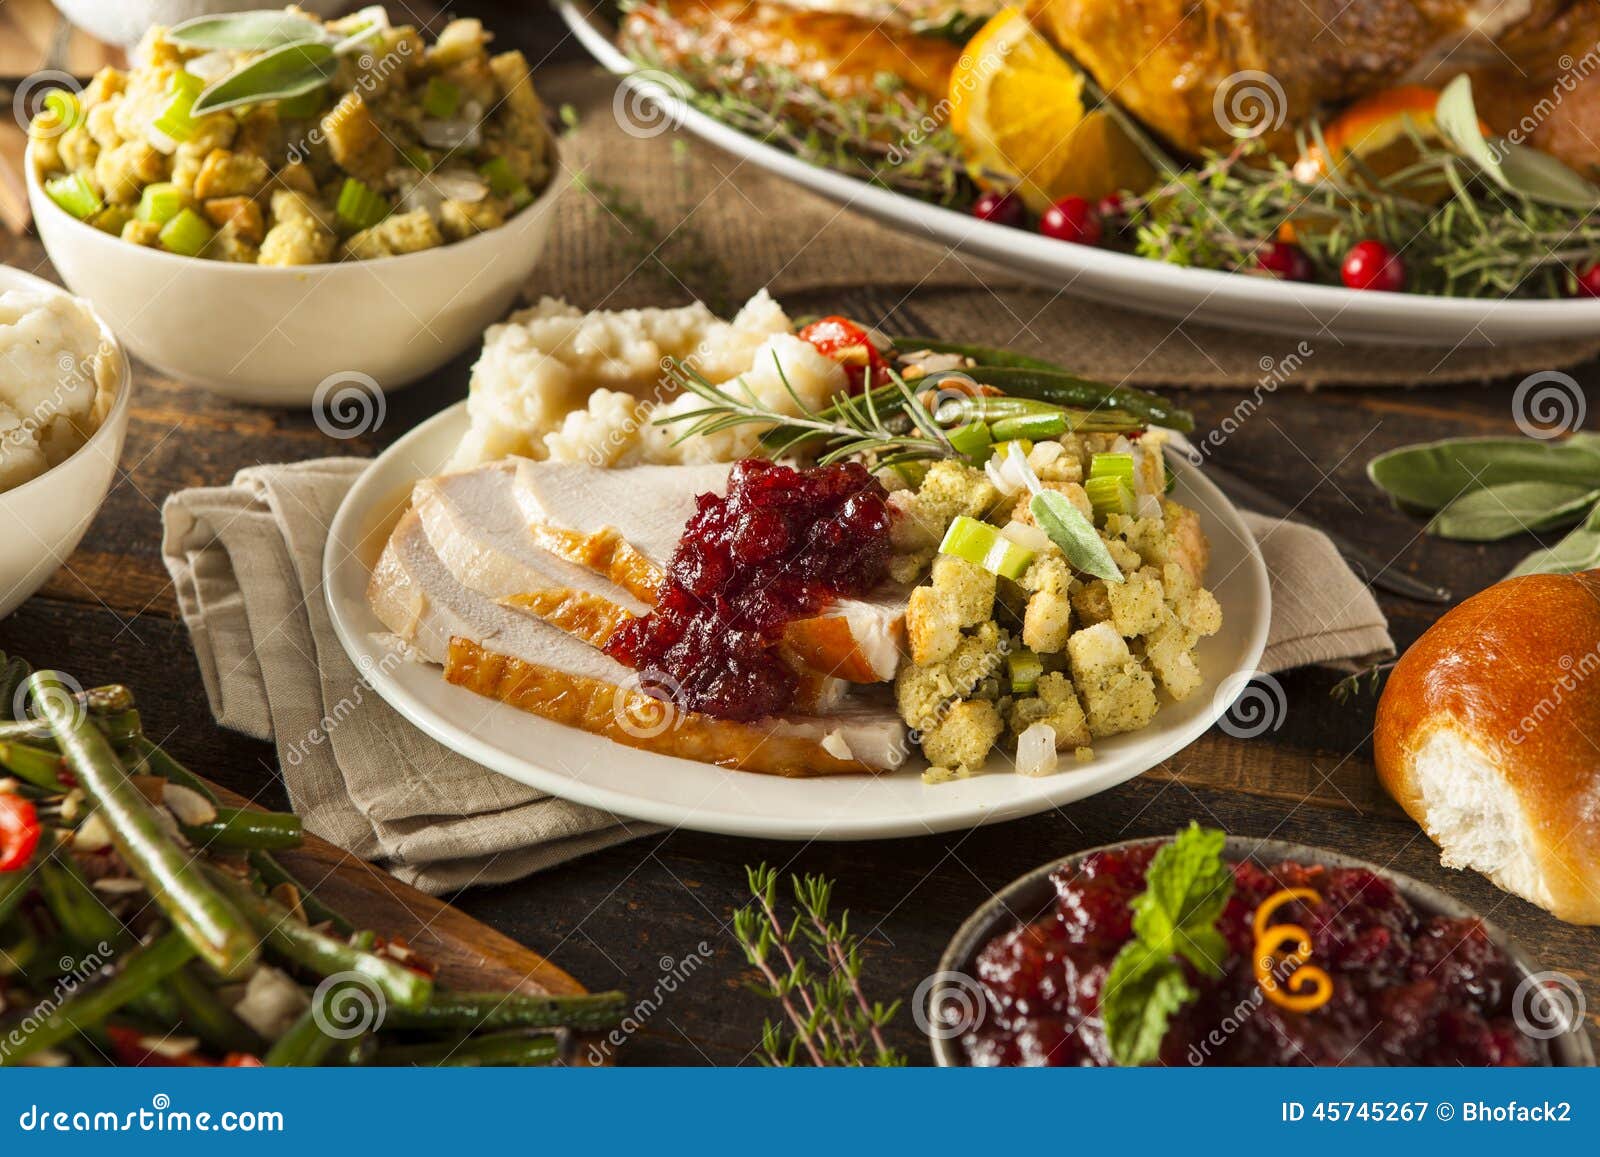 Homemade Thanksgiving Turkey on a Plate Stock Image - Image of cooked ...